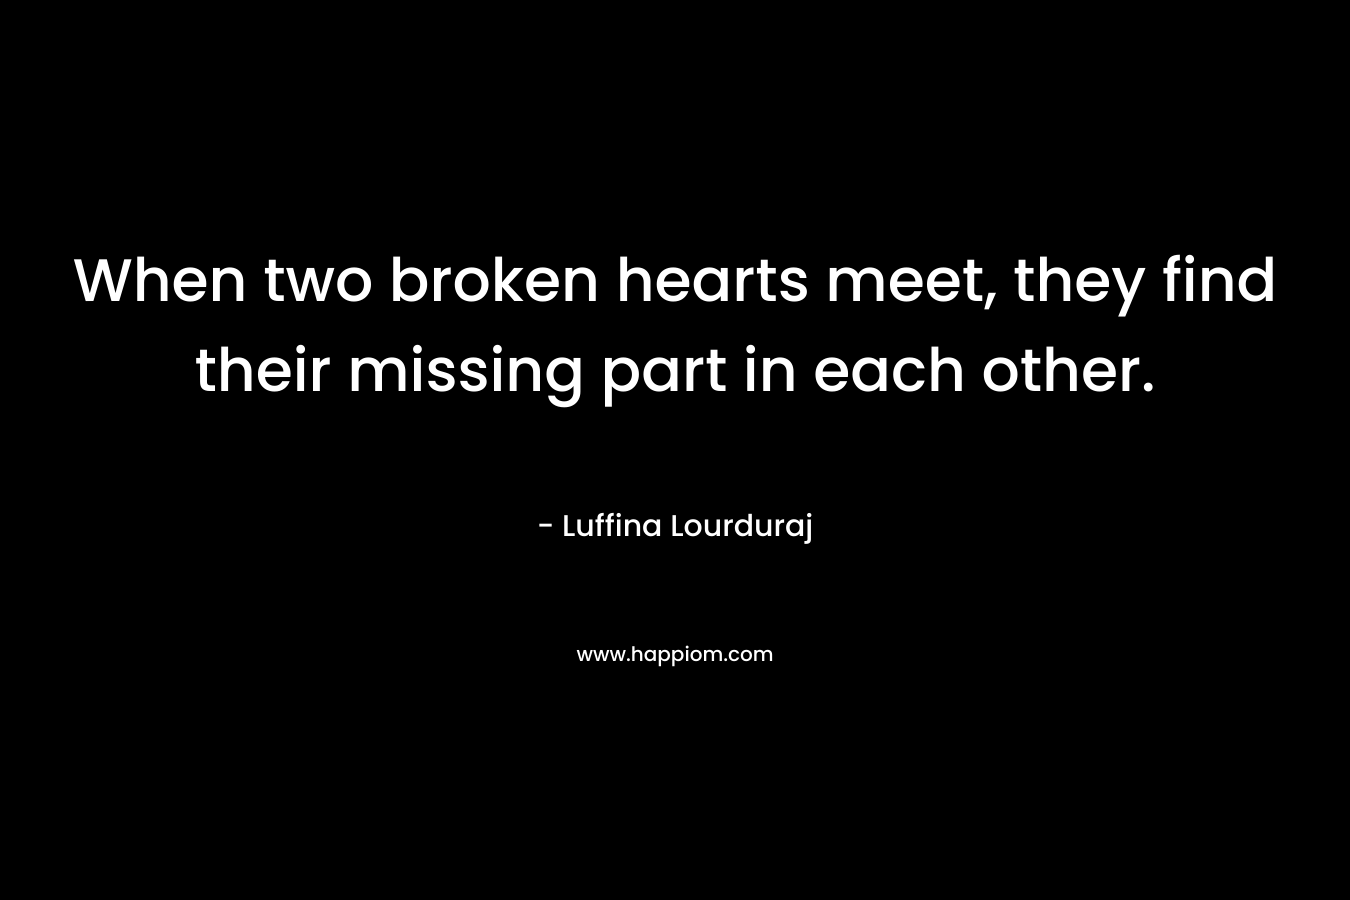 When two broken hearts meet, they find their missing part in each other.